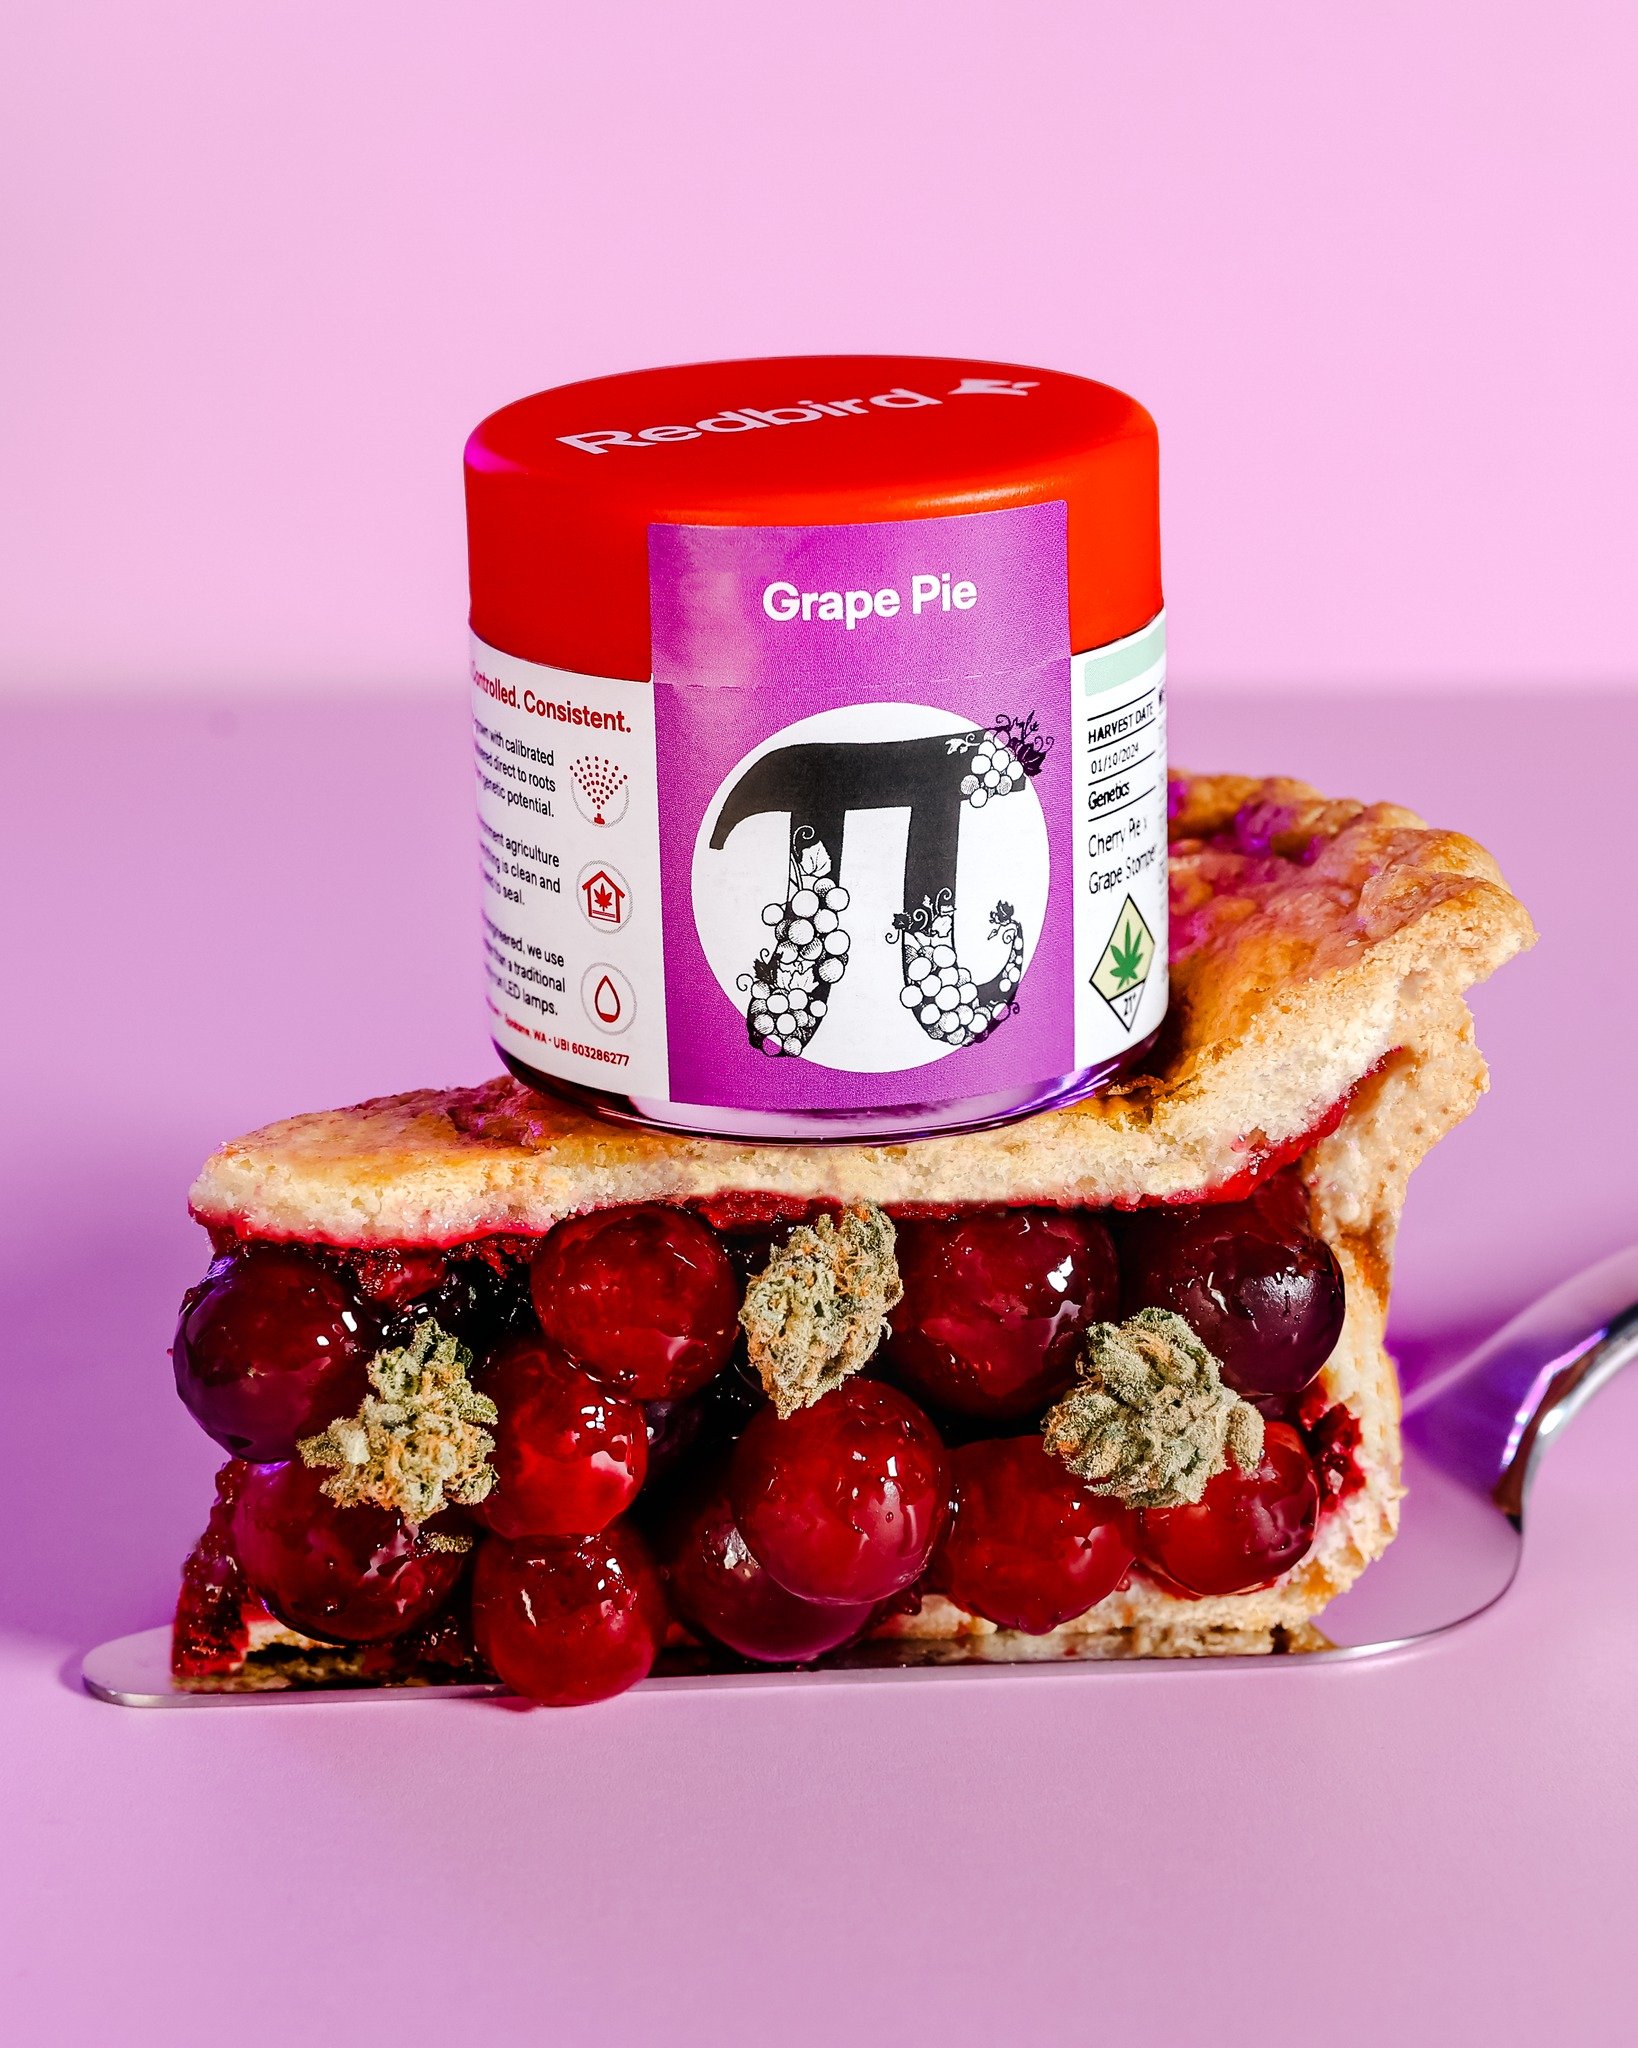 Indulge your senses in a slice of heaven with our GRAPE PIE. 🍇🥧 

GRAPE PIE, a yummy hybrid cross of Cherry Pie x Grape Stomper, is sweet, potent, and oh-so-satisfying, 

***This product has intoxicating effects and may be habit forming. Marijuana 